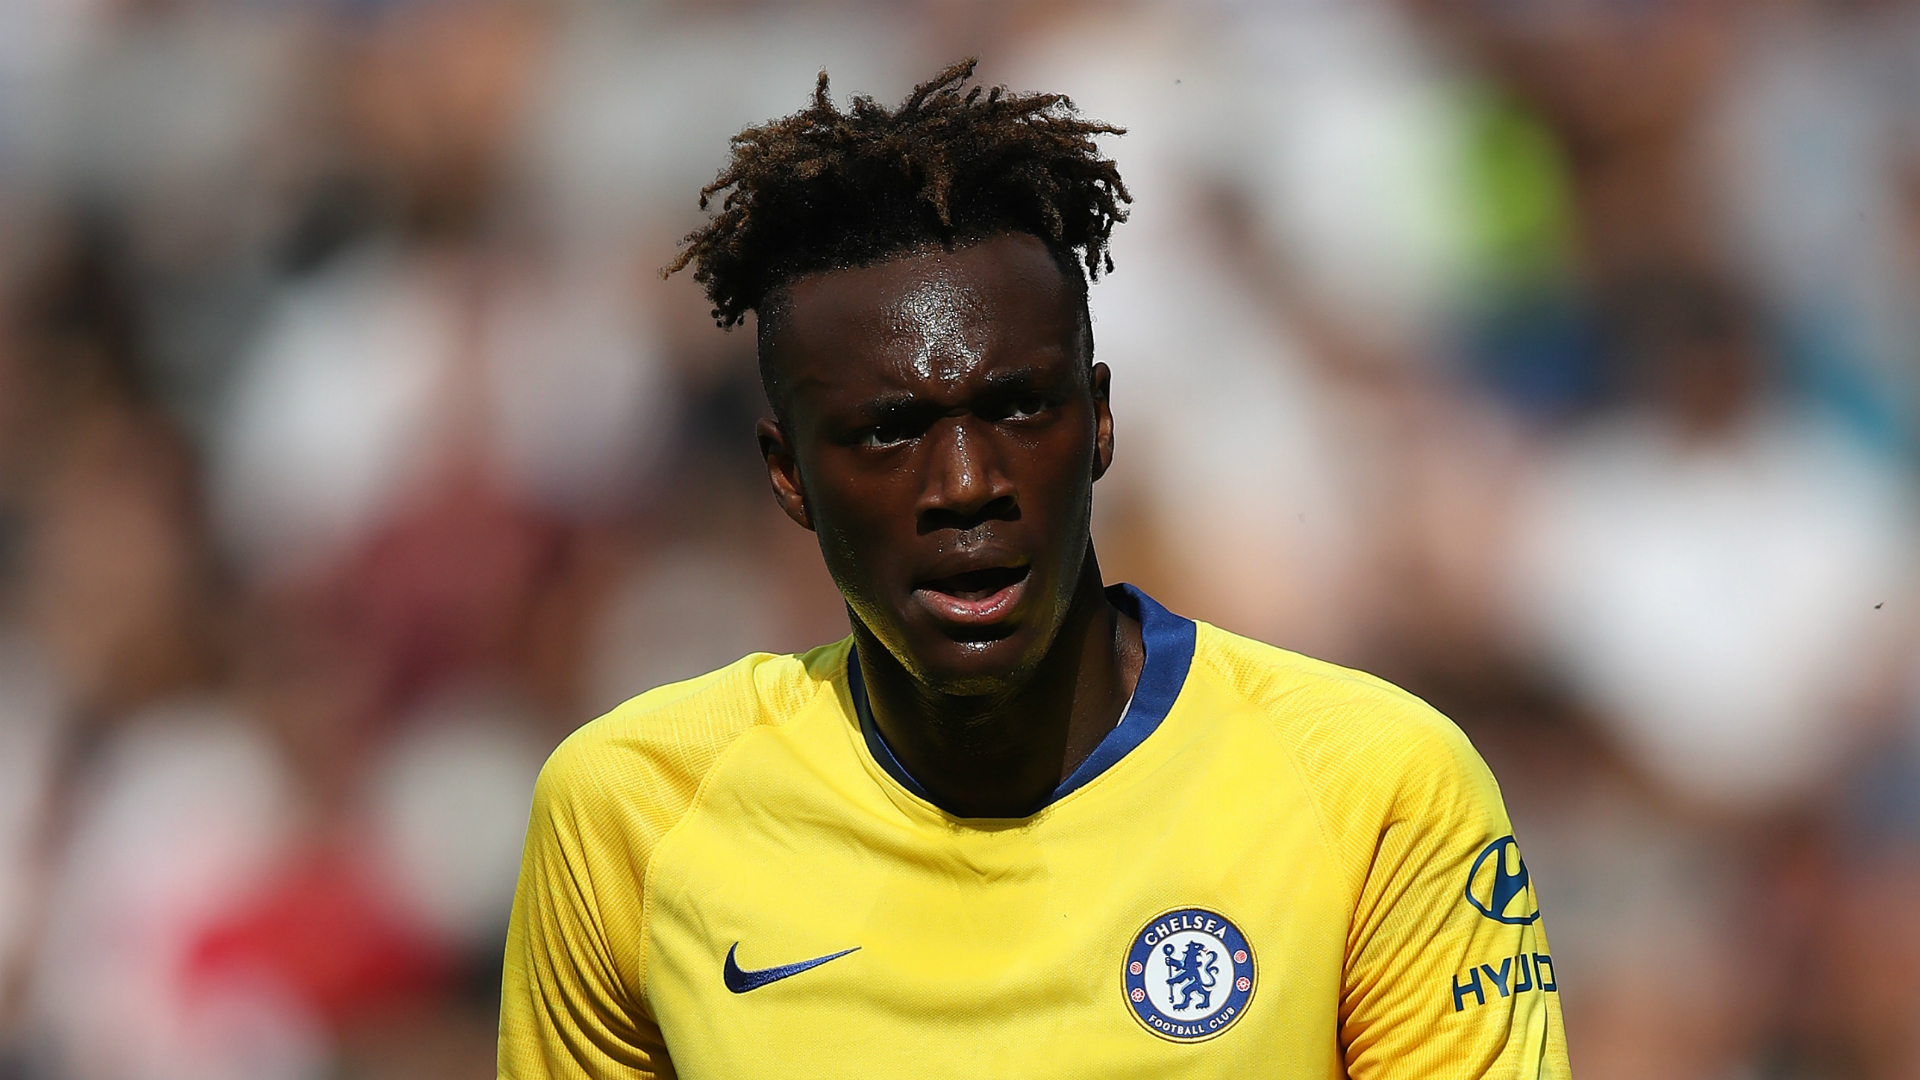 Chelsea made two changes for Saturday's Premier League match against Norwich City.